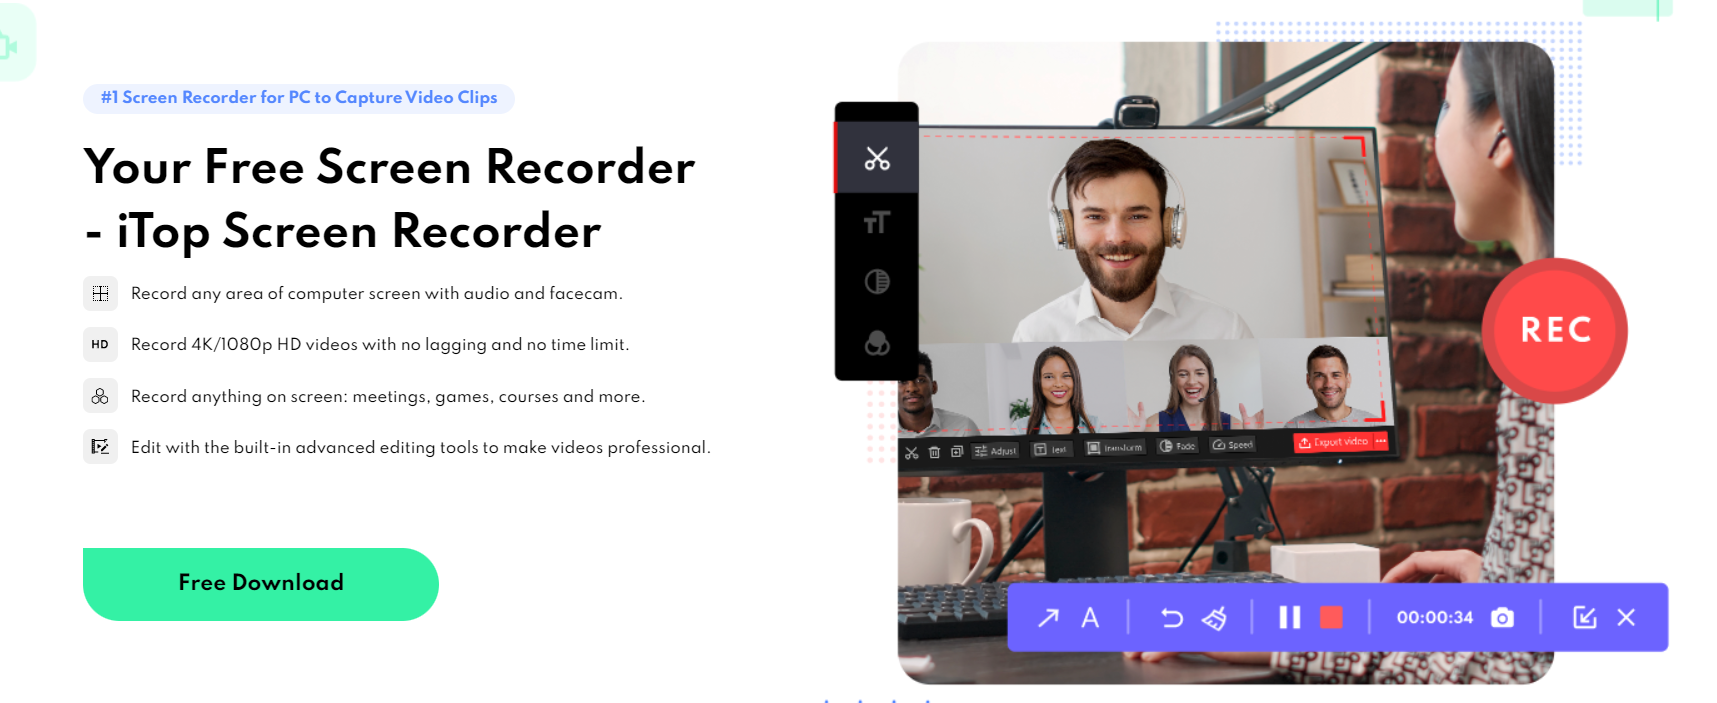 Itop - Top 5 Professional Screen Recorder or Video Editor